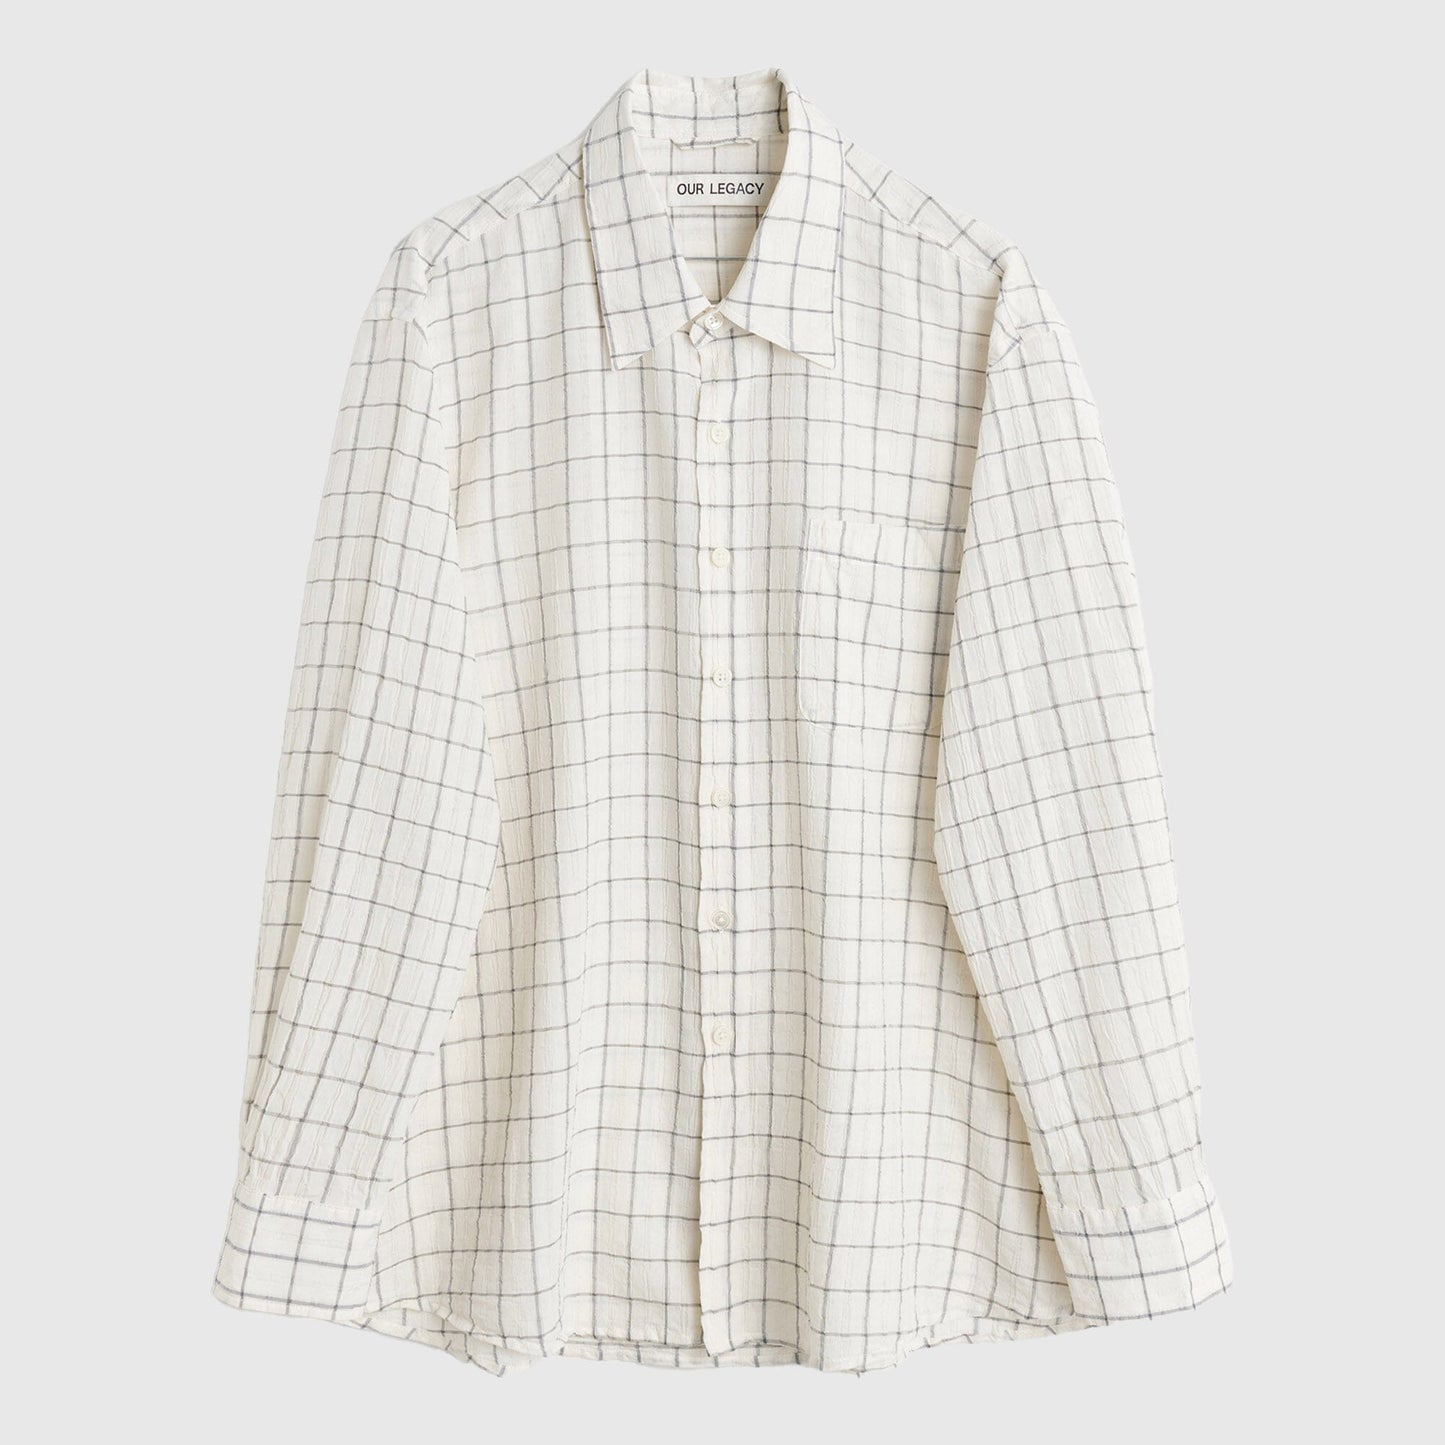 Our Legacy Above Shirt - Light Mediterranean Check Shirt Our Legacy 